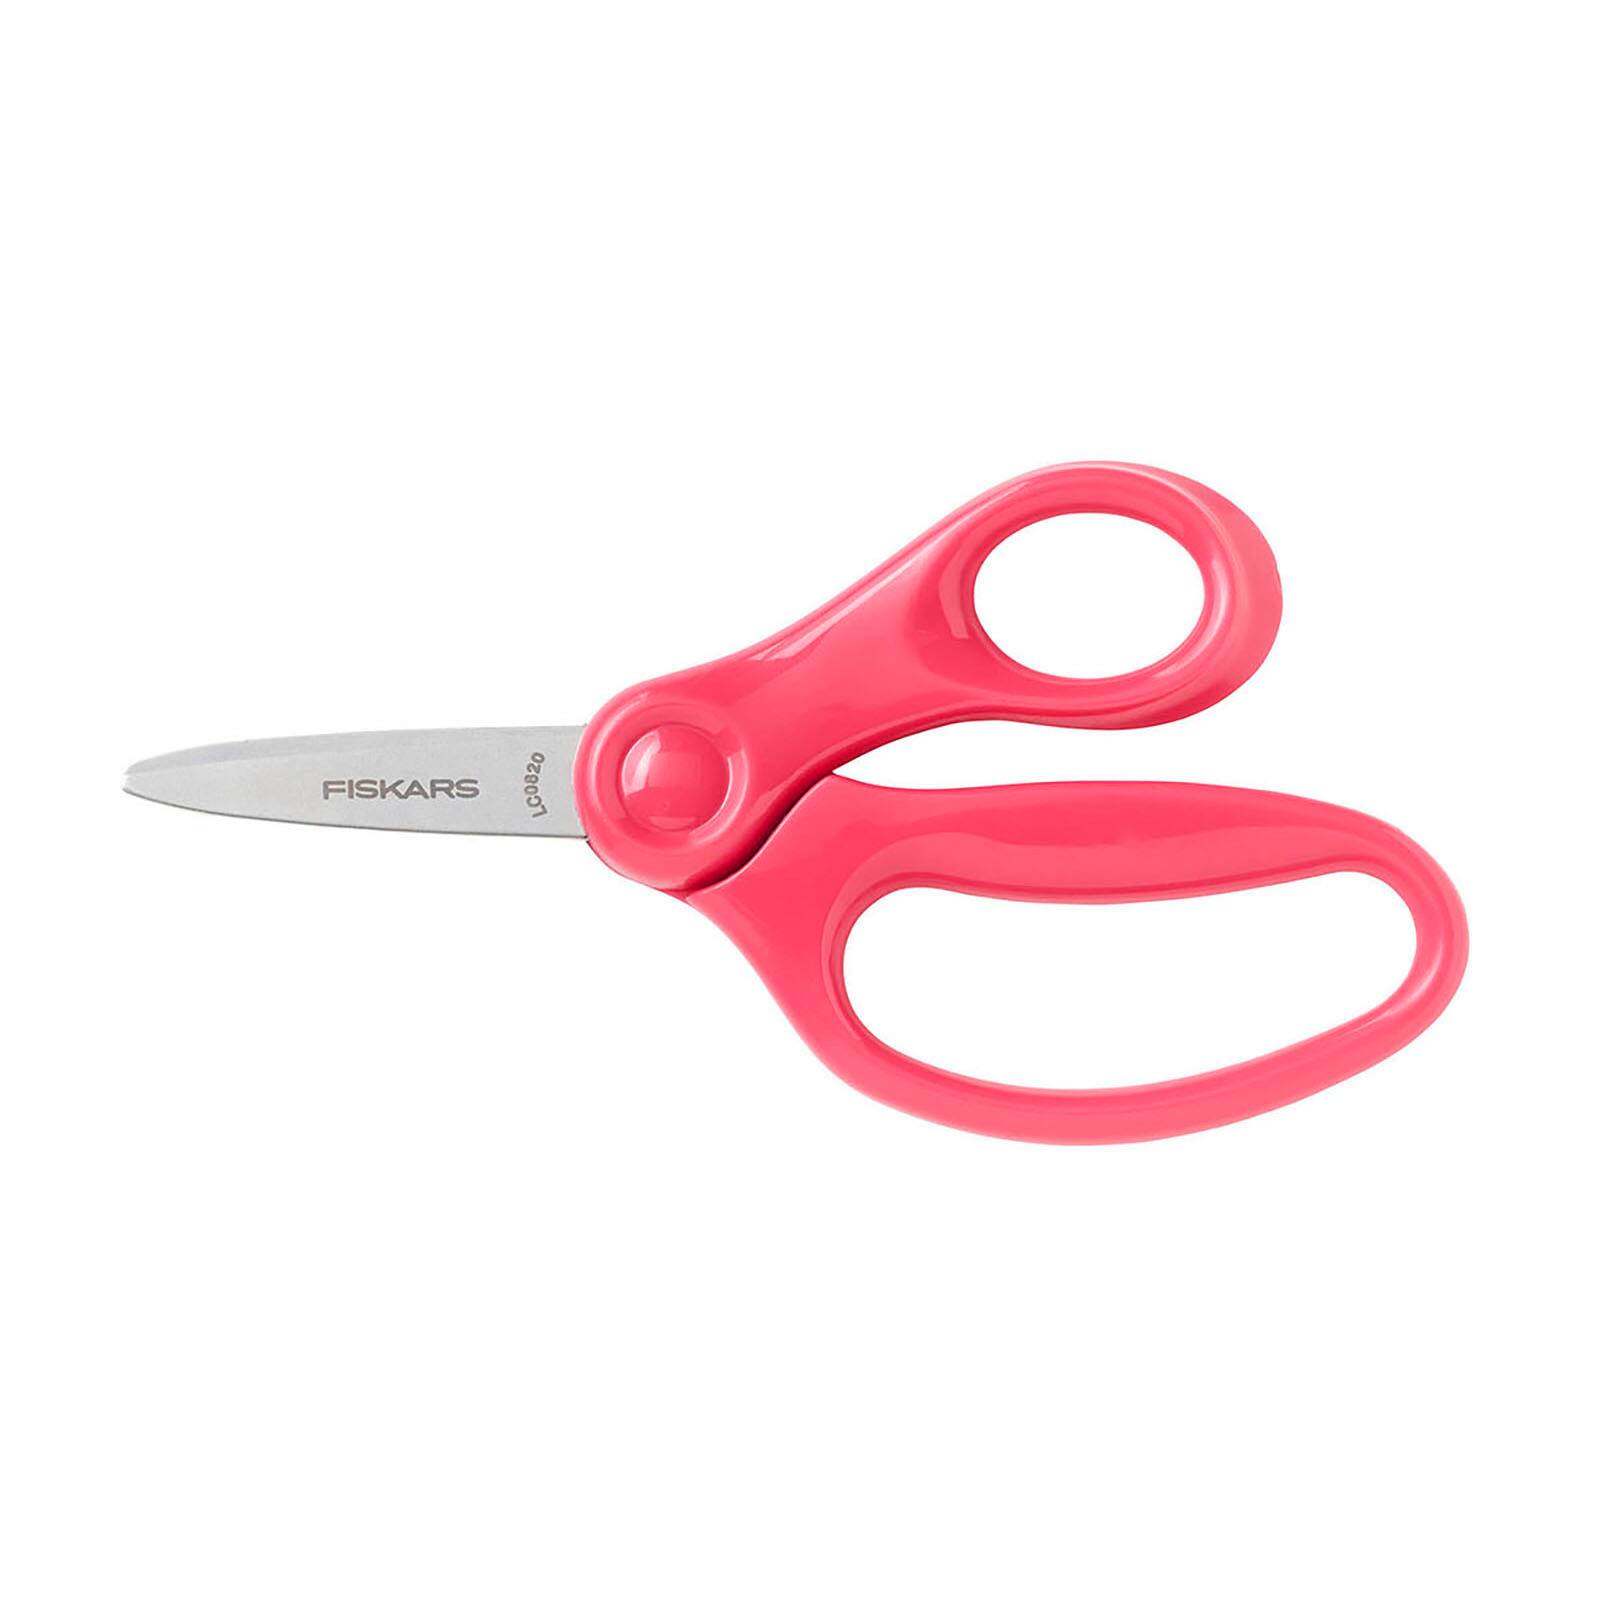 Pack of 12 Pointed School Left and Right Handed Kids Scissors Assorted Colors 5 Pointed